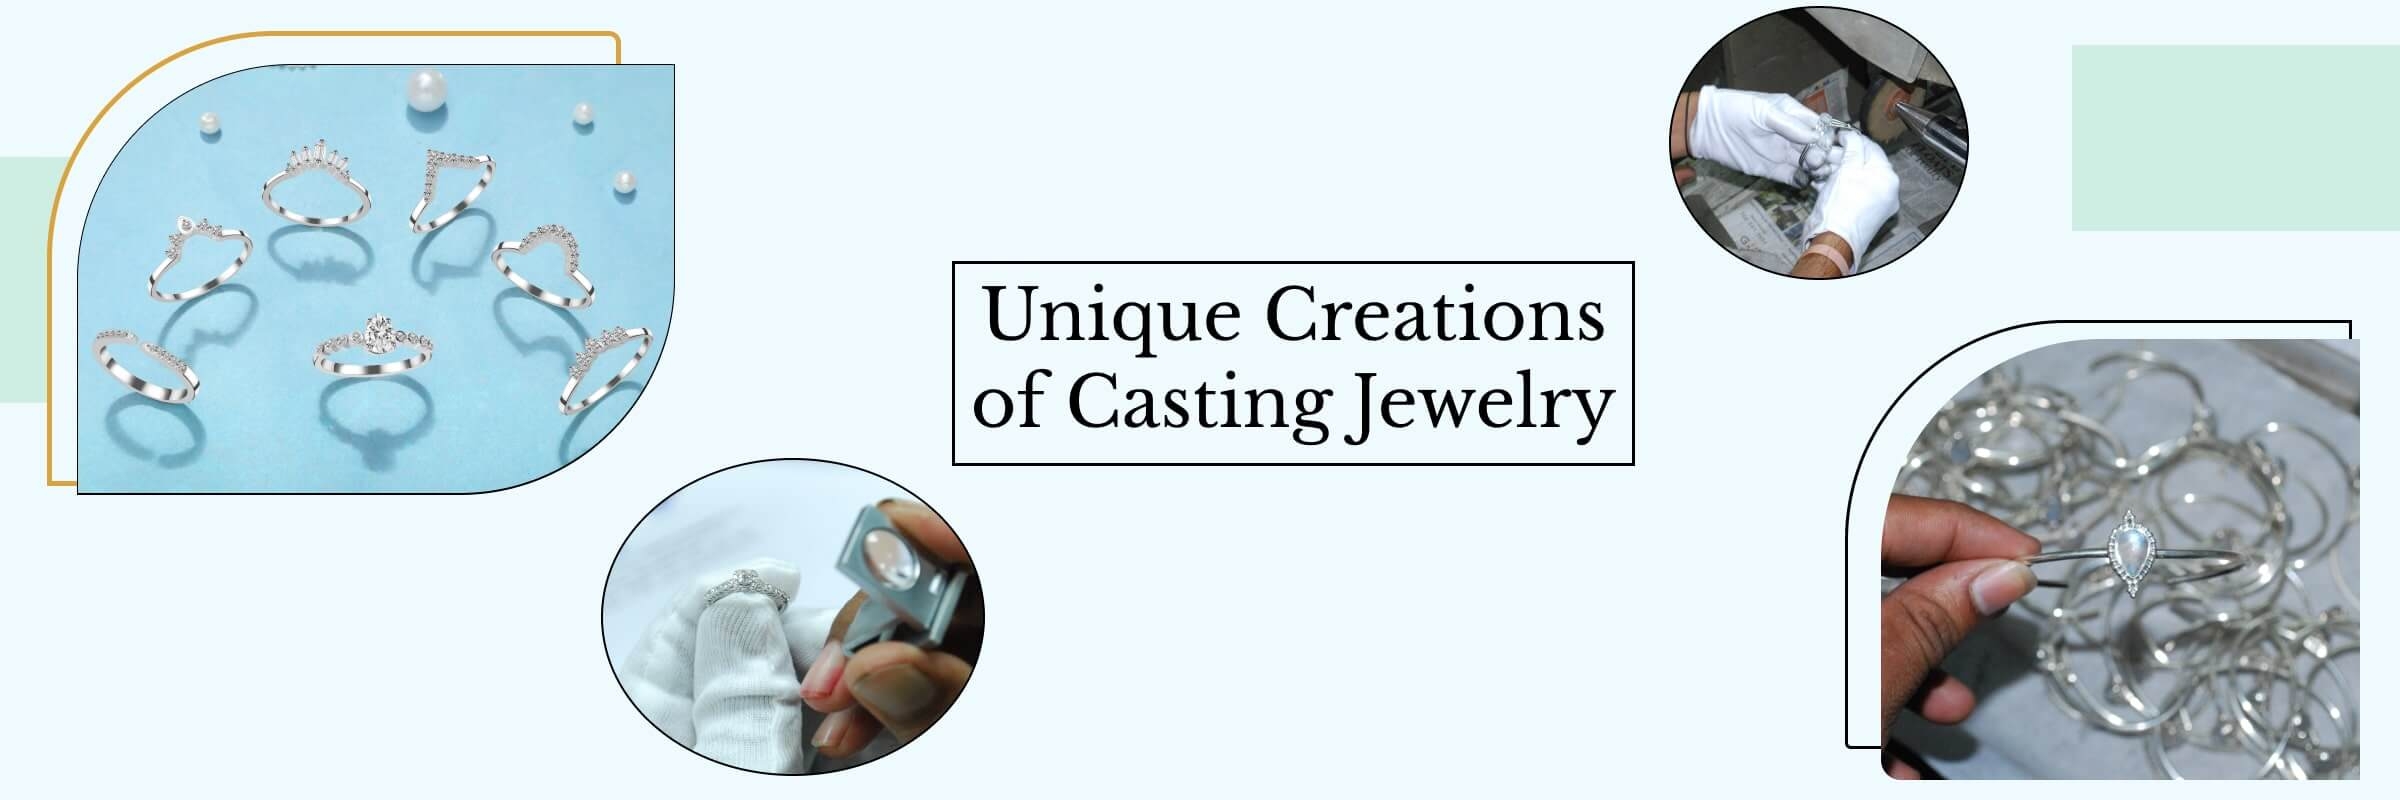 Fine Processing Secret of Casting Jewelry for Unique Creations - Liquid Metal Artistry